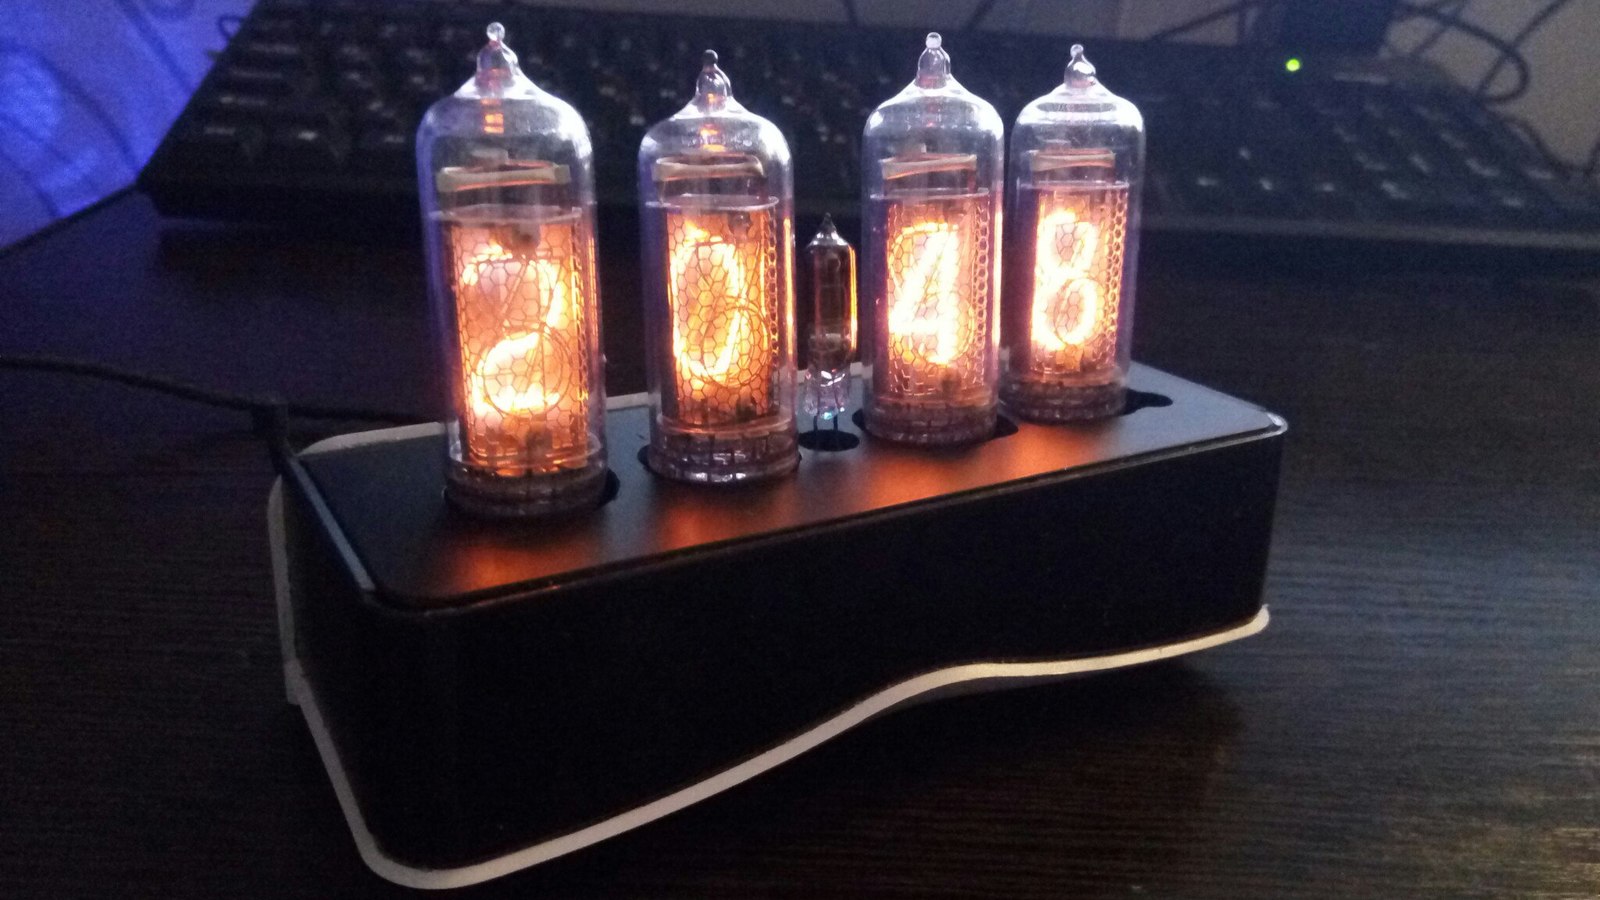 Hours on gas-discharge indicators IN-14, case made of a broken TV set-top box) - My, Lamp character, Watches on the GRI, Gas discharge indicators, In-14, Lamp clock